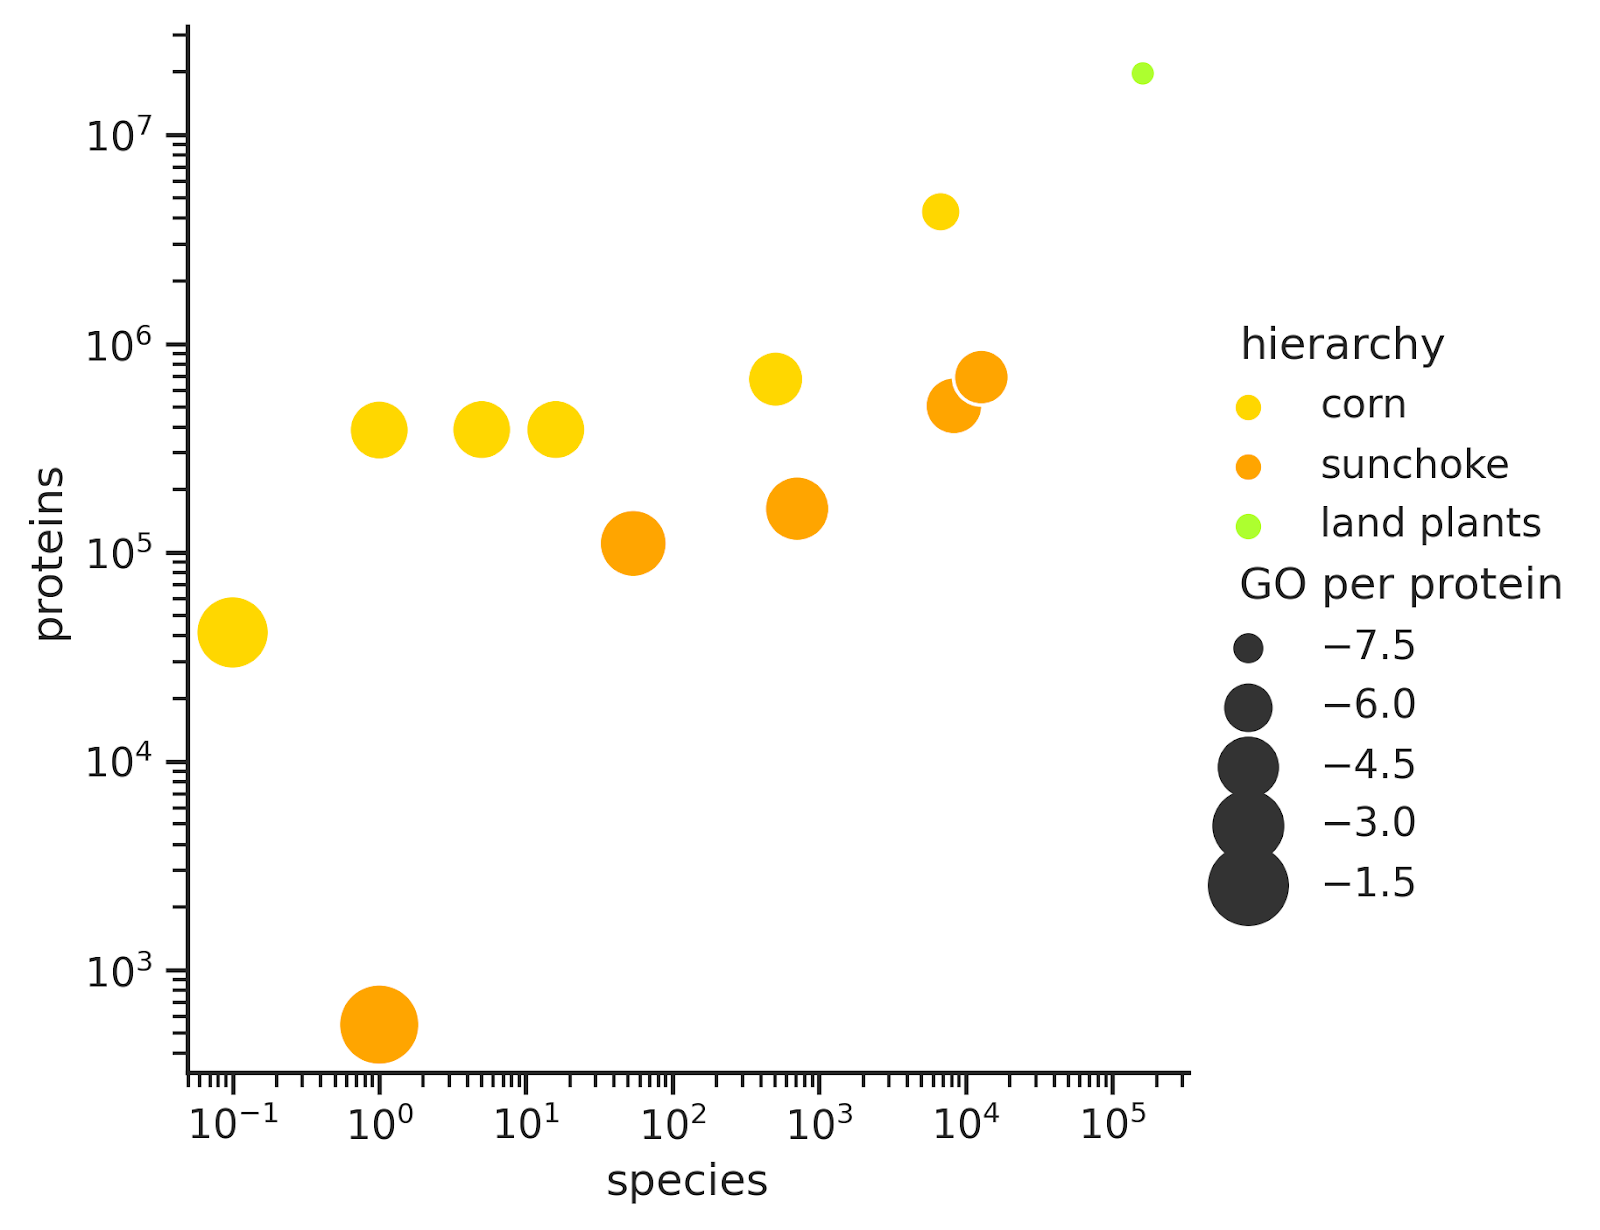 Protein and species counts in Corn and Sunchoke Taxonomic Hierarchies, scaled by the log ratio of unique PFAMS to proteins